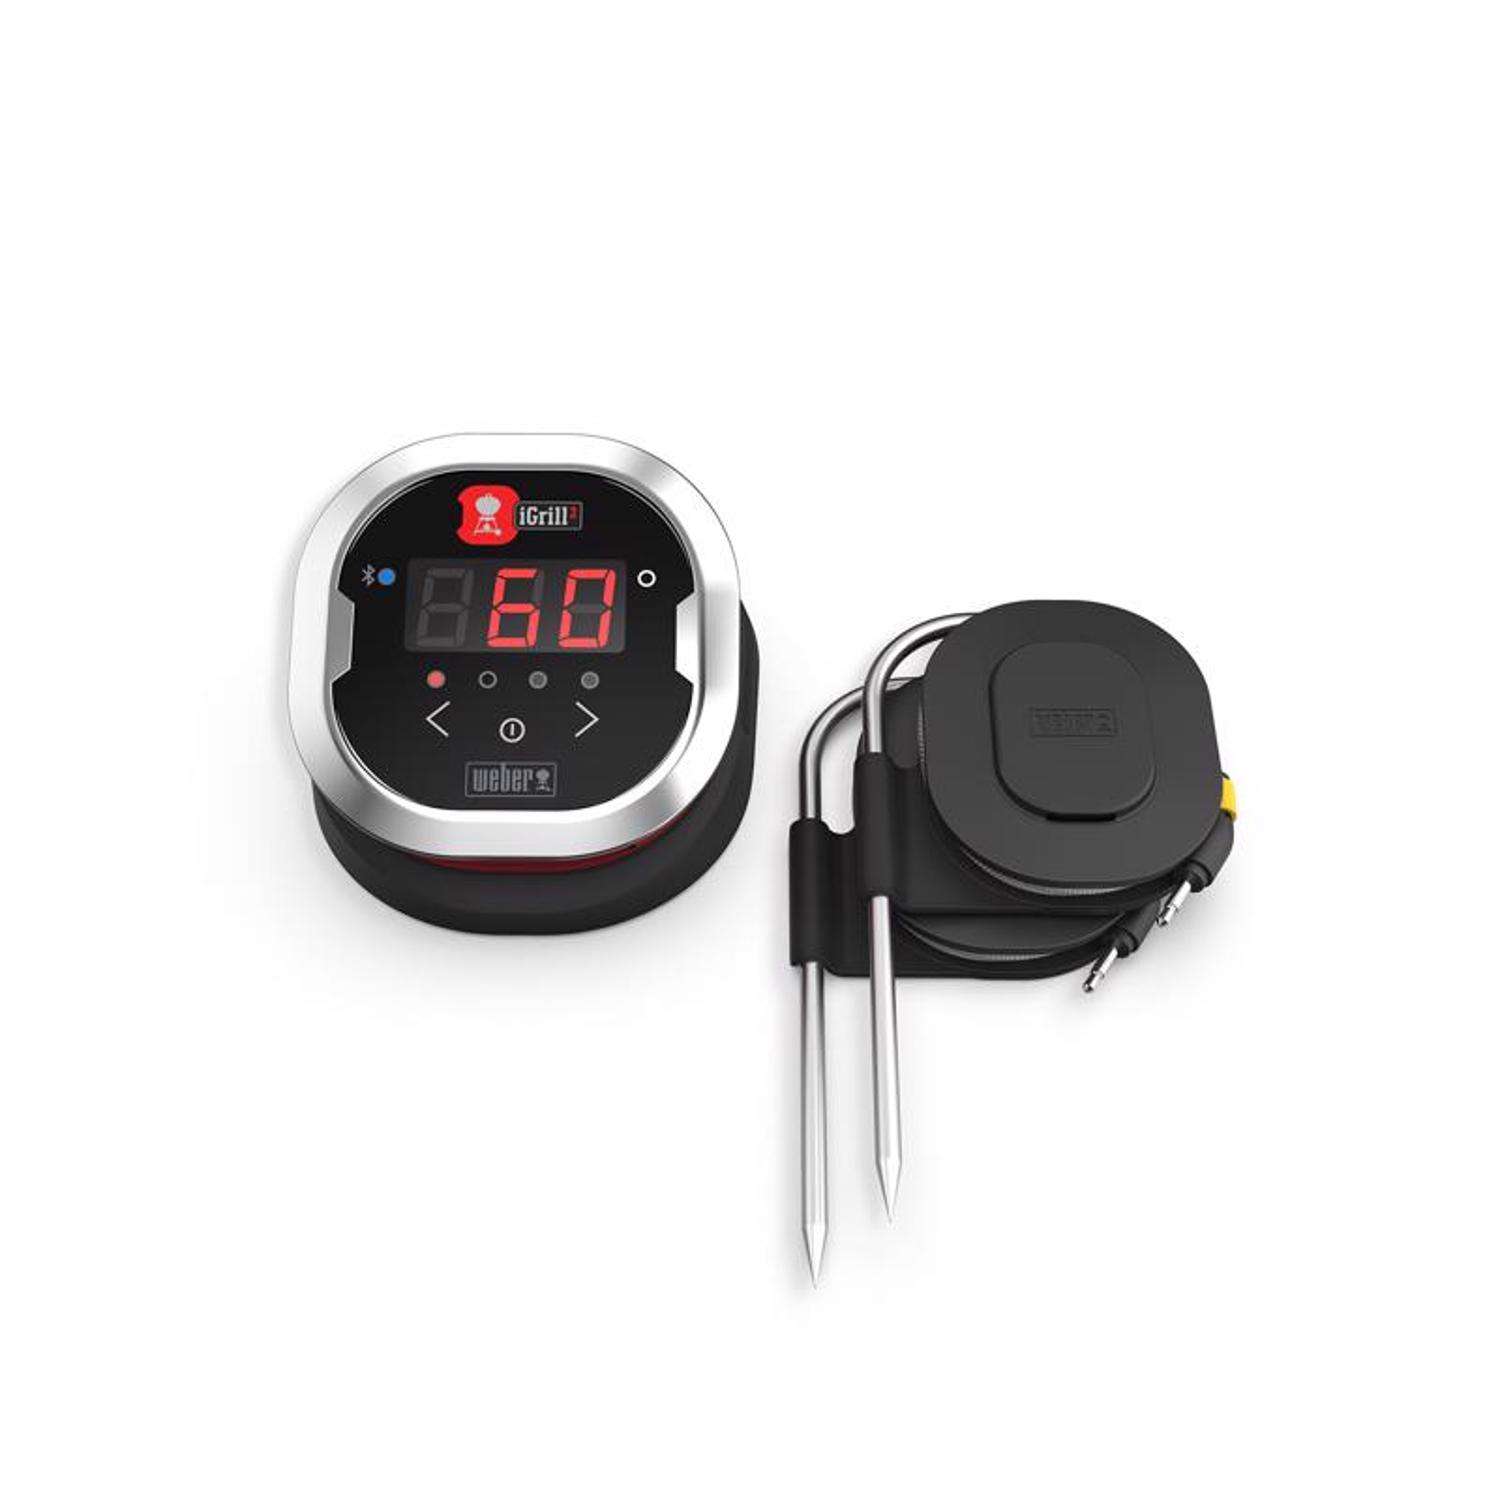 Weber iGrill 2 Digital Bluetooth Grill/Meat Thermometer - Ace Hardware